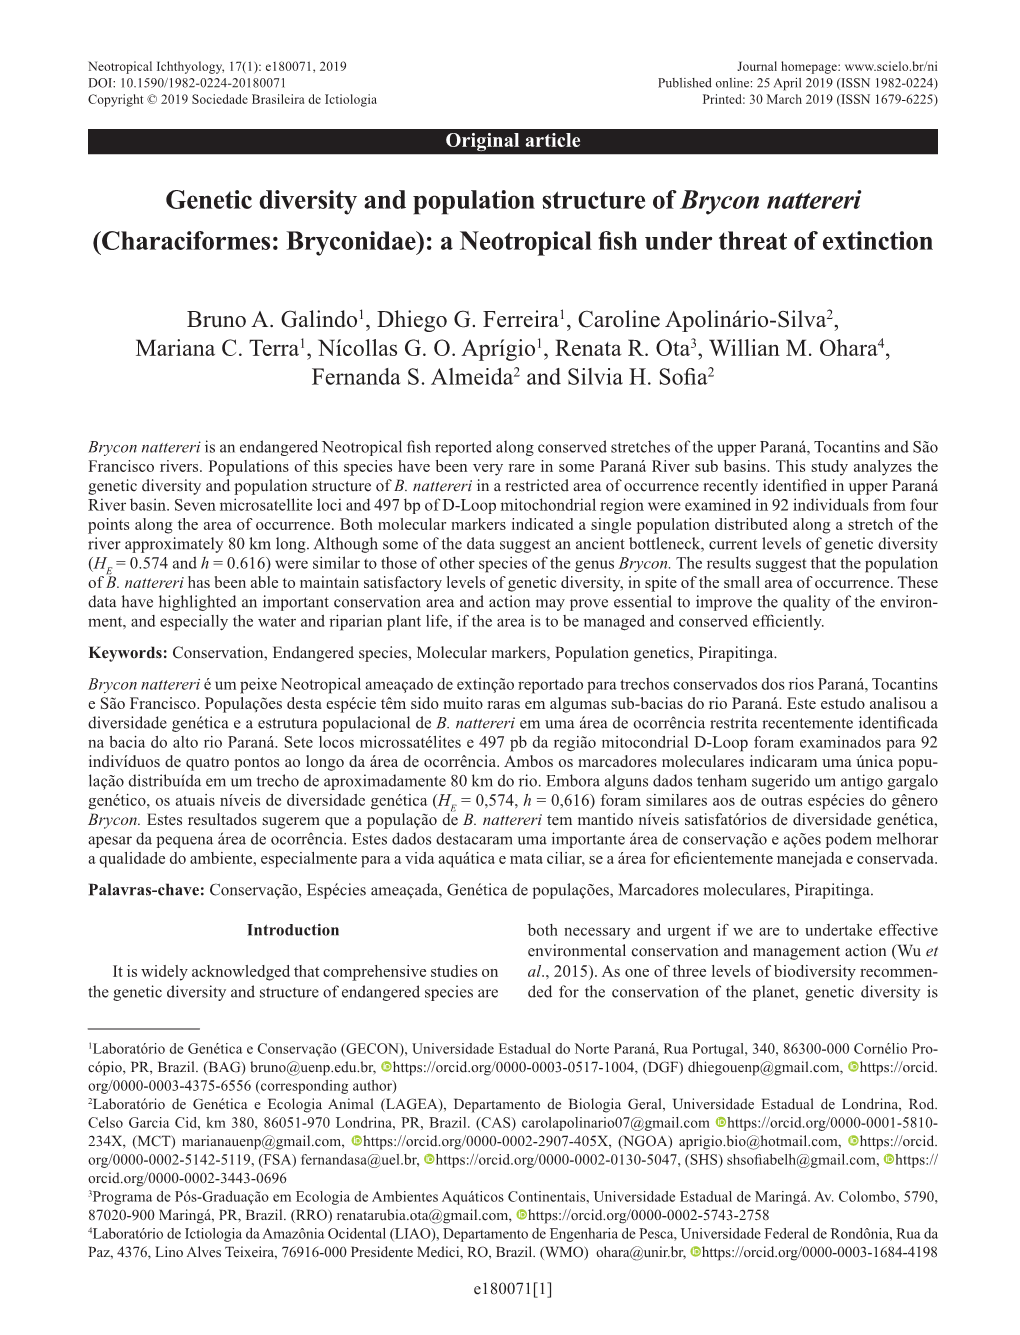 Genetic Diversity and Population Structure of Brycon Nattereri (Characiformes: Bryconidae): a Neotropical Fish Under Threat of Extinction